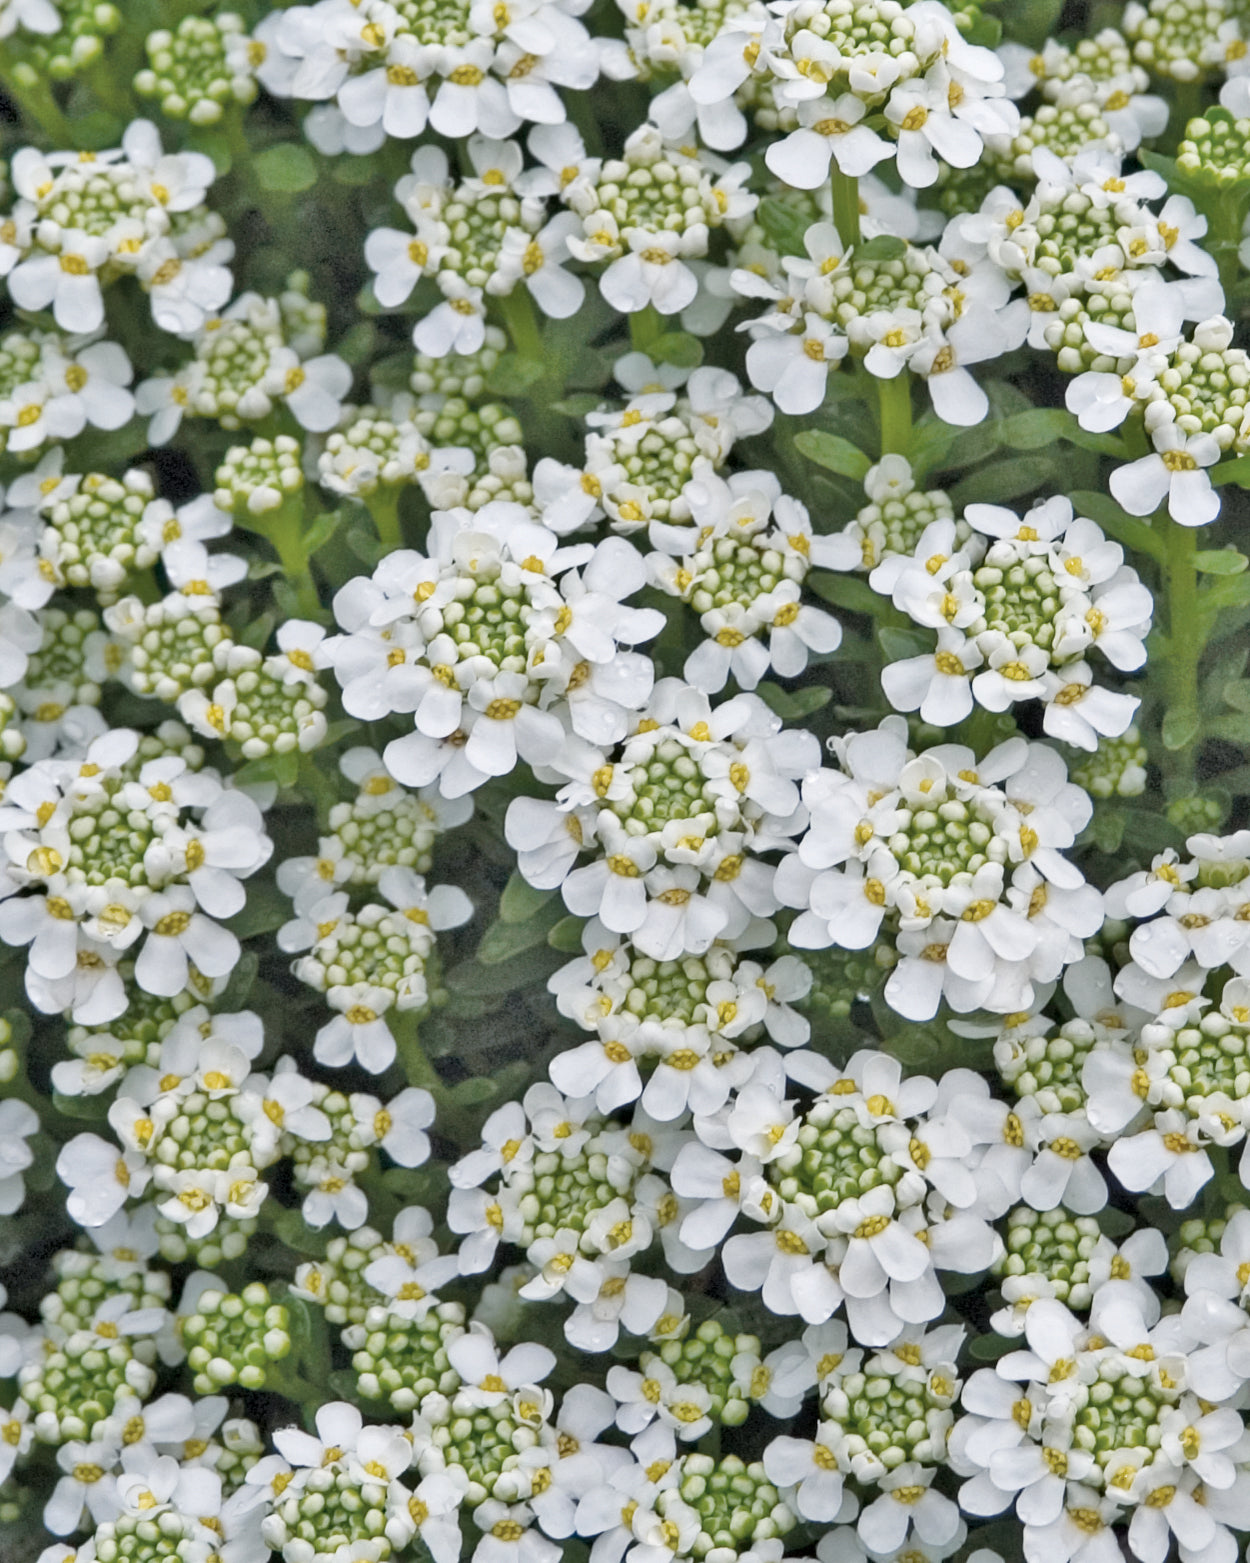 Iberis sempervirens Snowflake Candytuft Image Credit: Ball Horticulture Company